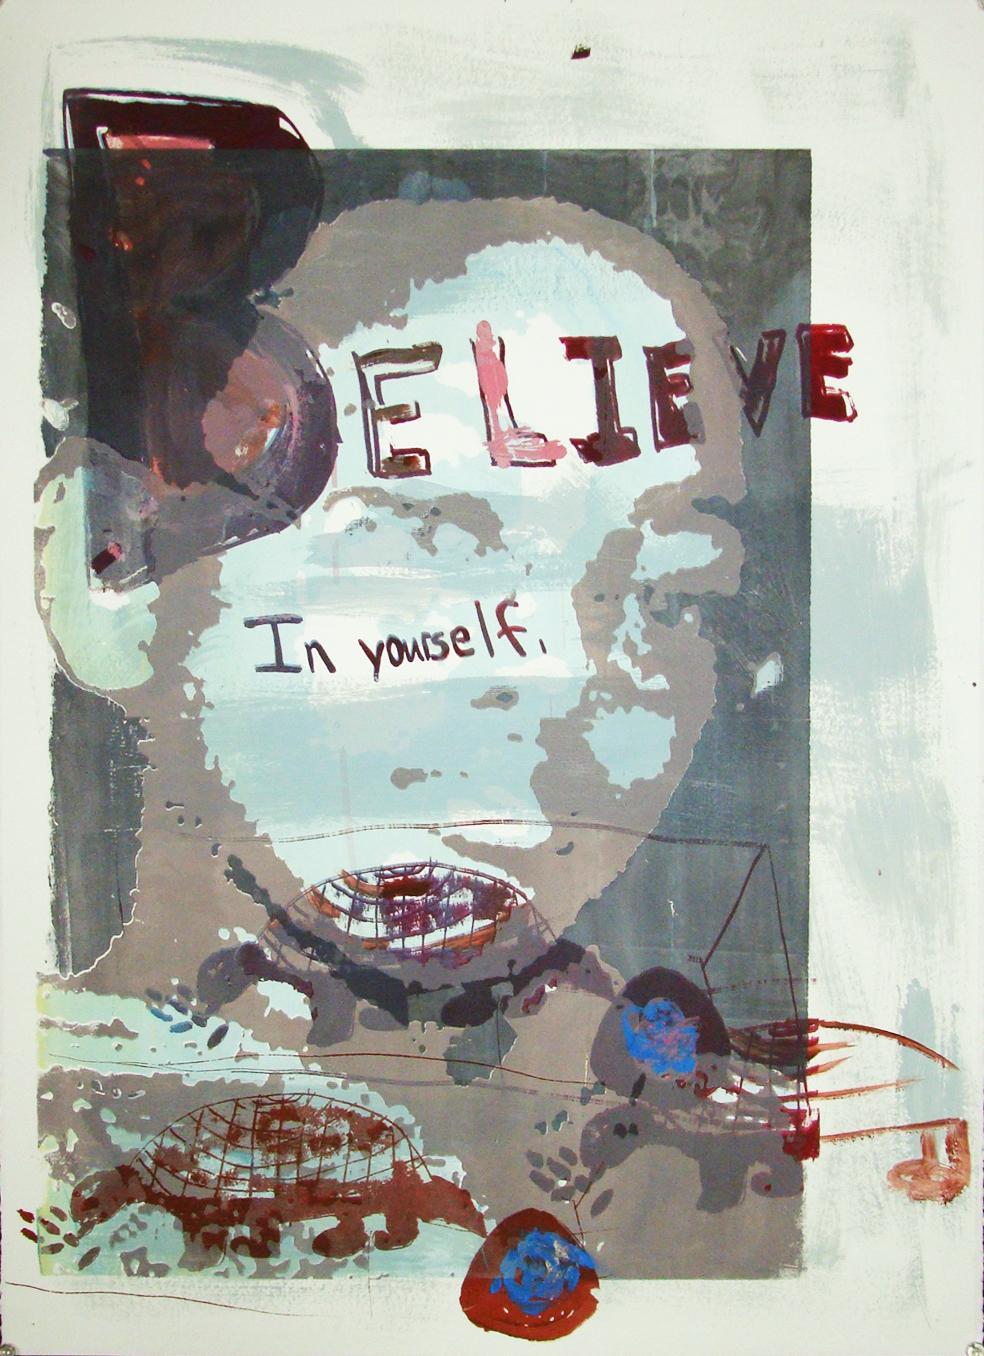 Tayler Morgan and Anne Brennan, Believe in Yourself 2, 2010, 30 x 22, paint and screenprint on paper. Morgan painted blue washes on the paper.